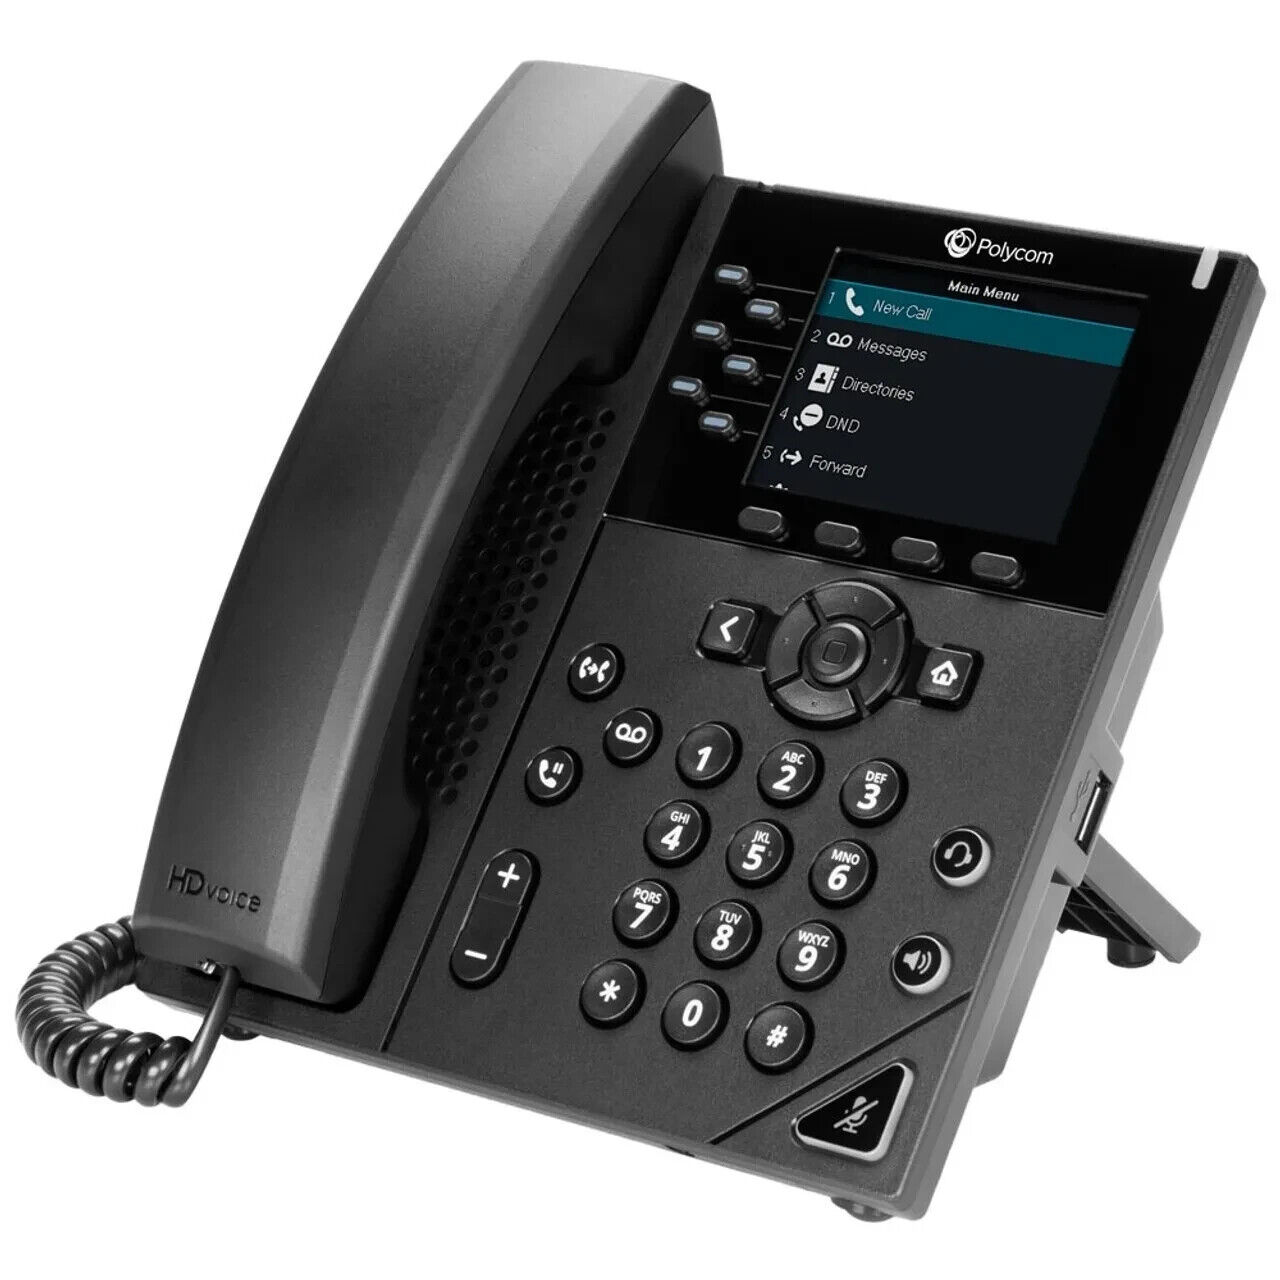 Poly VVX 350 Business IP Phone VoIP #2201-48830-101